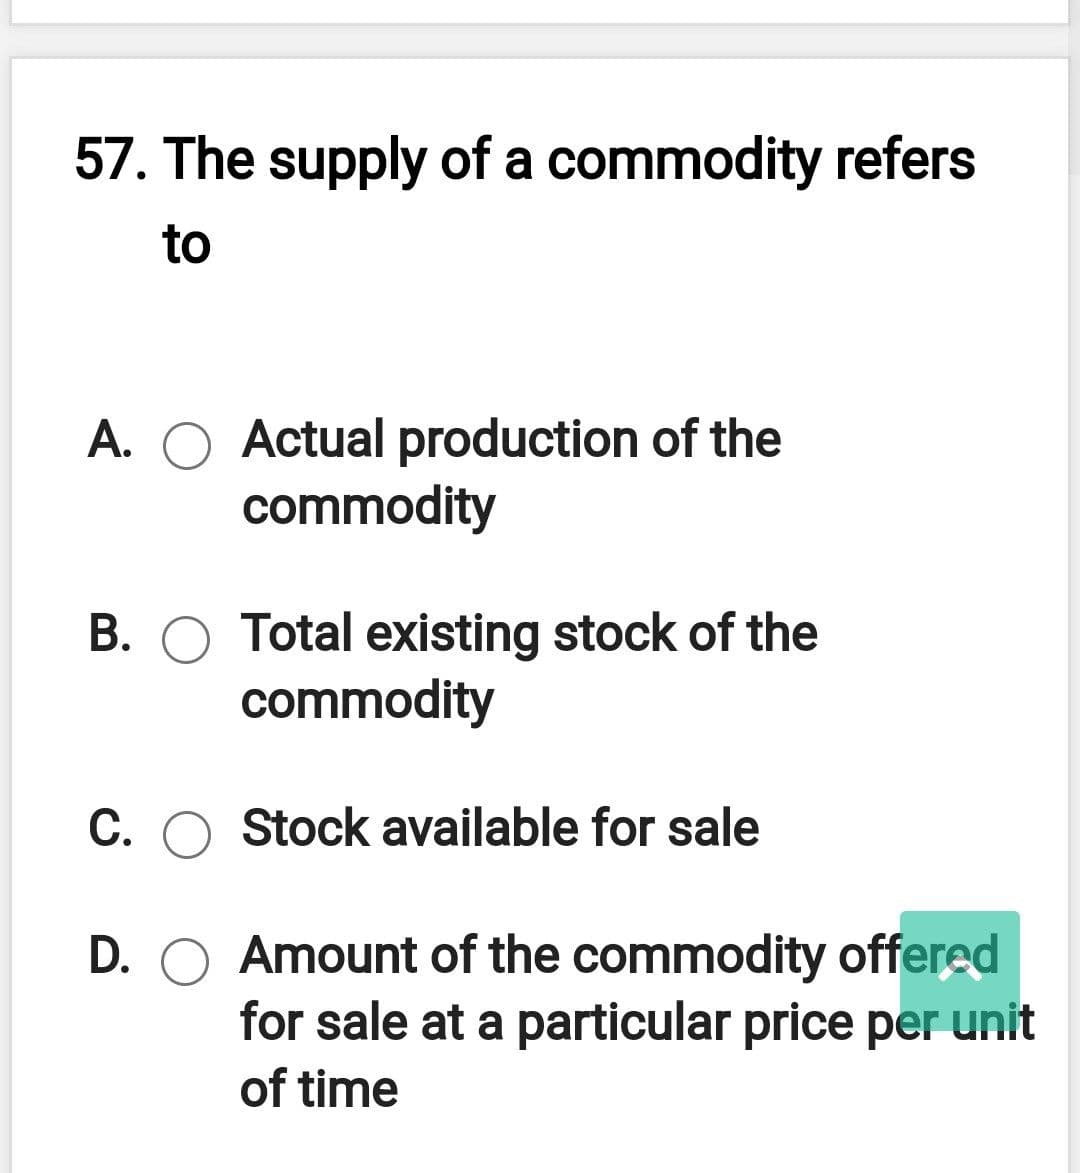 57. The supply of a commodity refers
to
A. O Actual production of the
commodity
B. O Total existing stock of the
commodity
C. O Stock available for sale
D. O Amount of the commodity offered
for sale at a particular price per unit
of time
